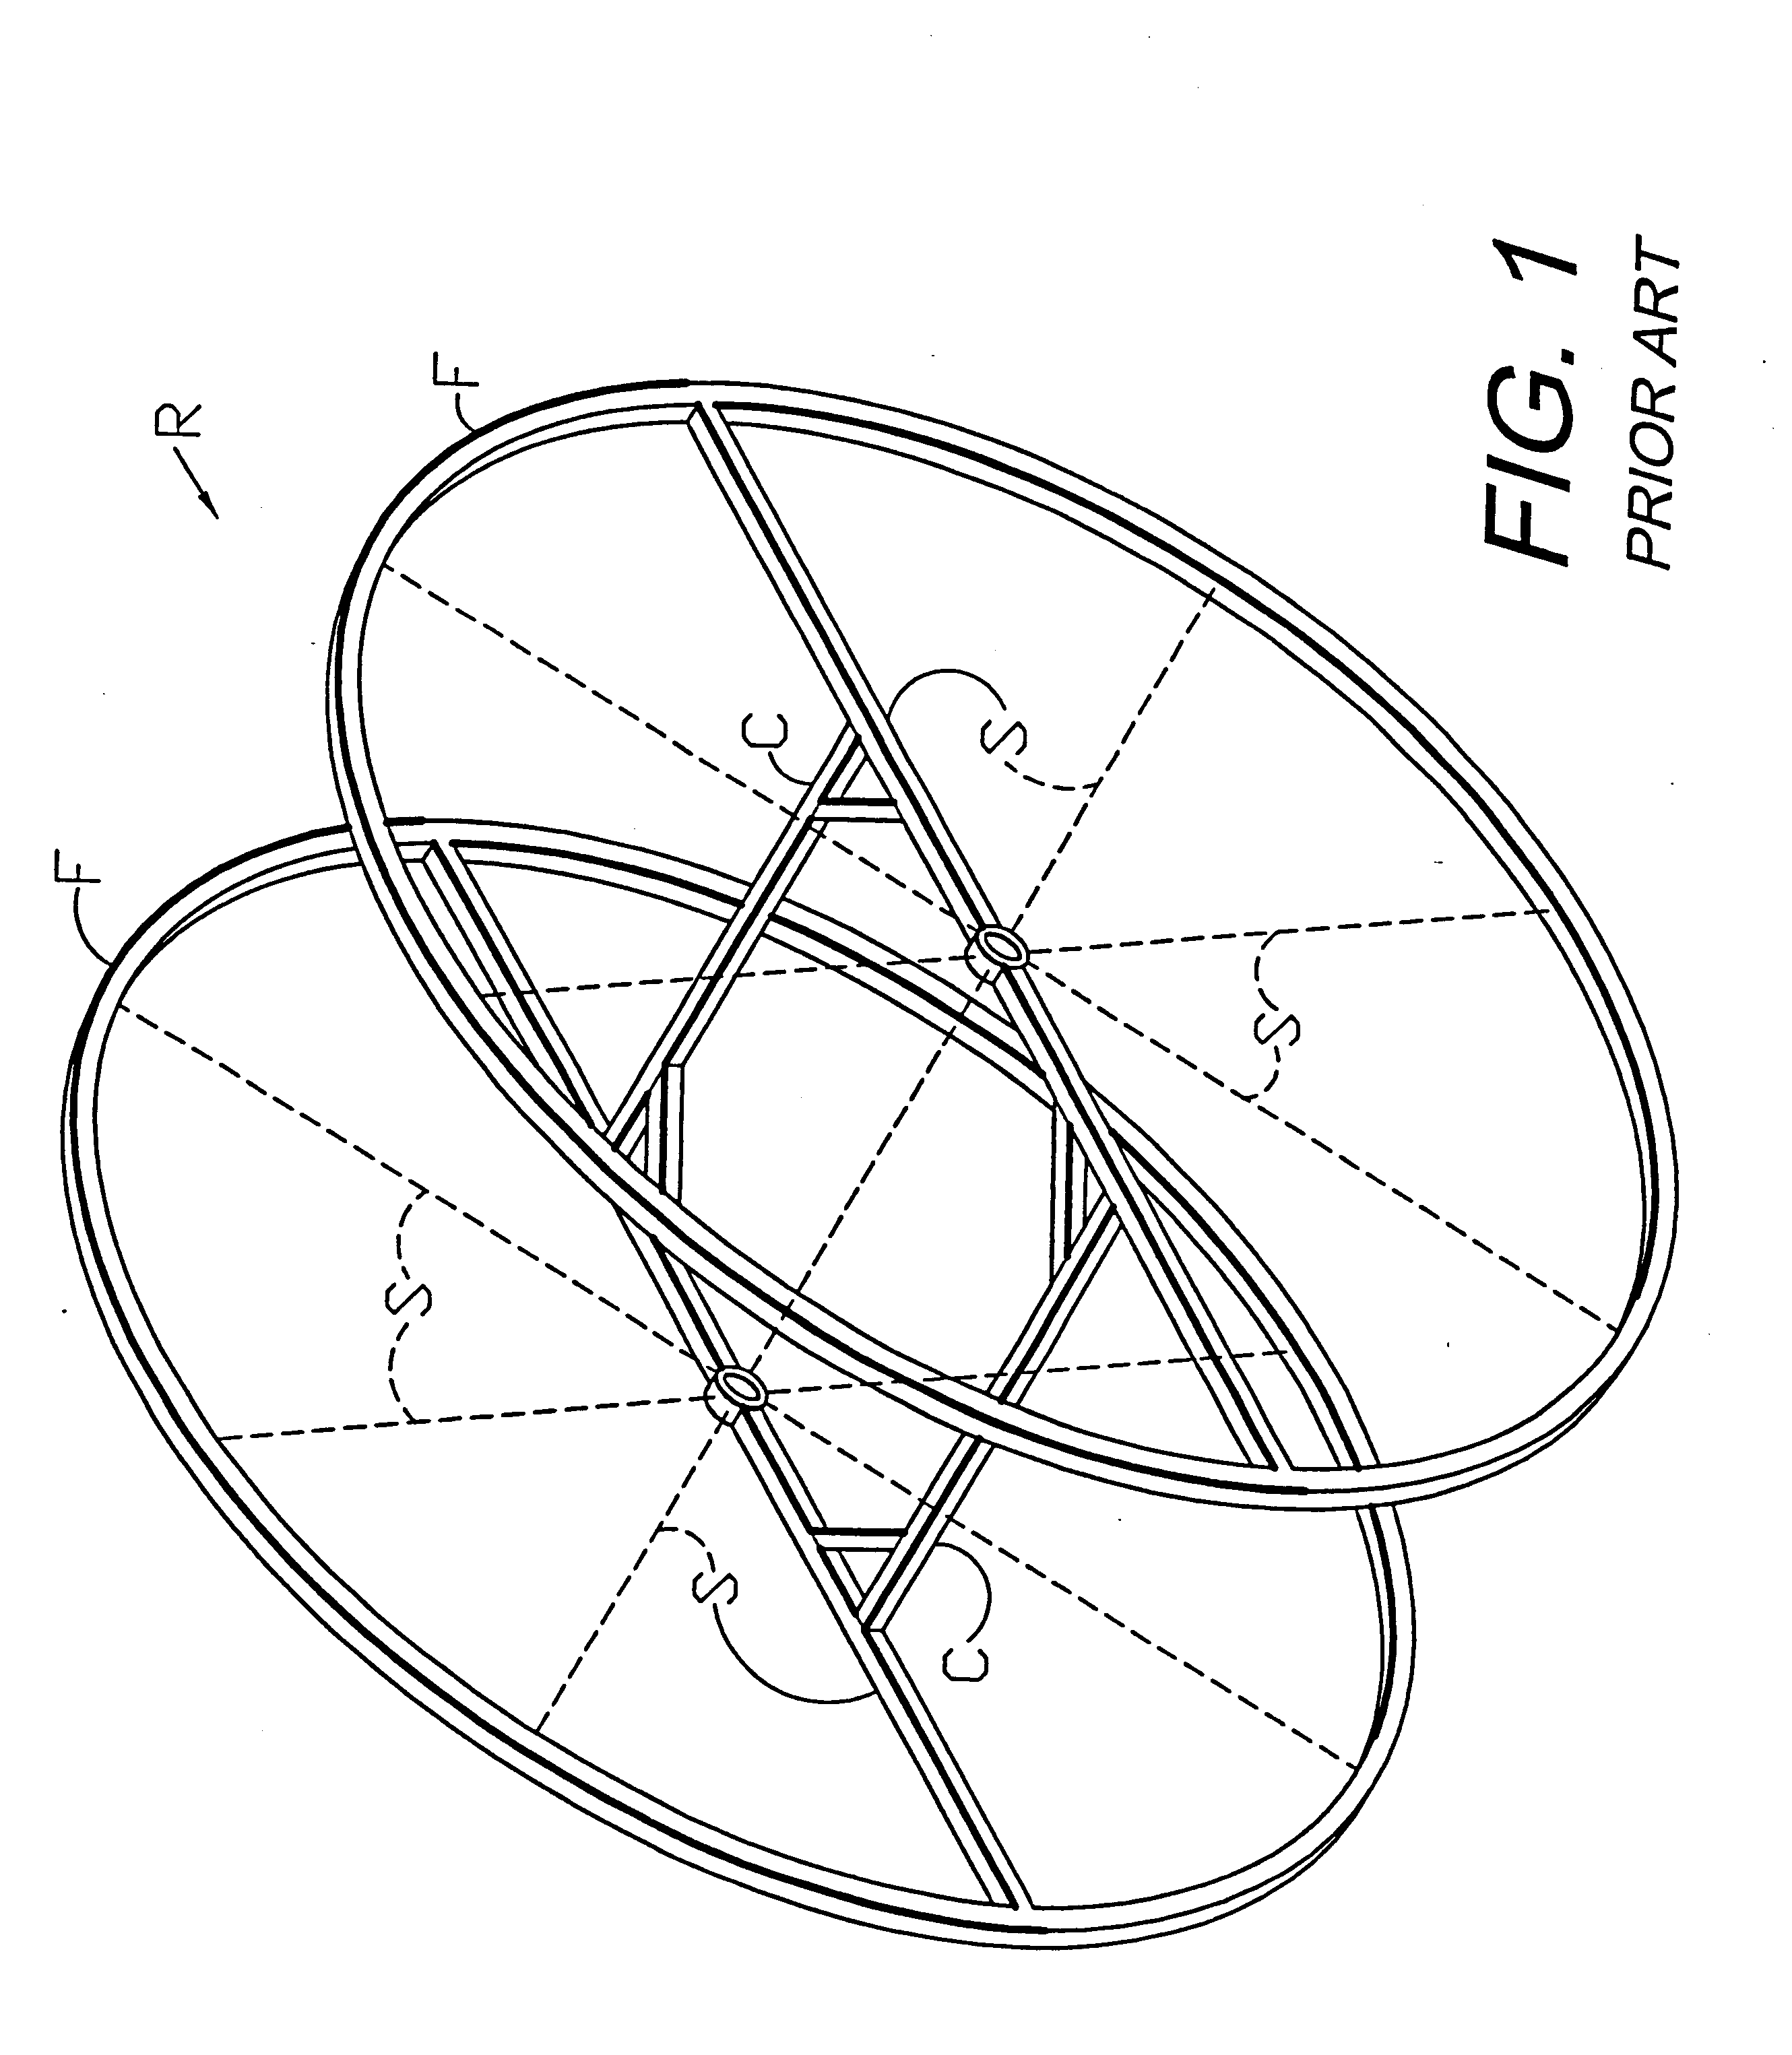 Knockdown, changeable reel system and method